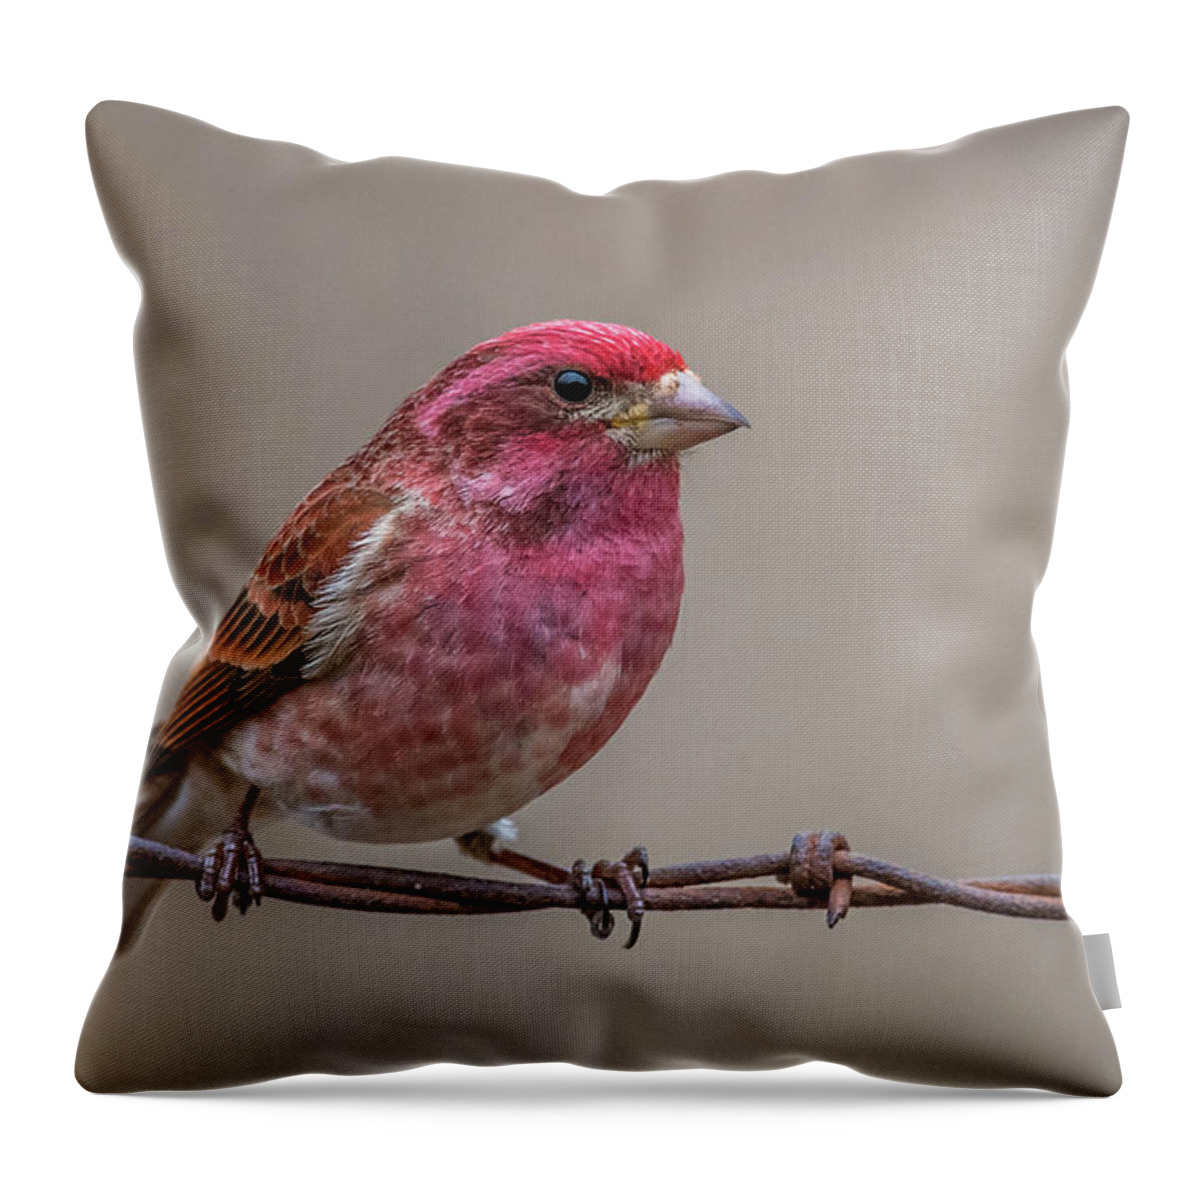 Purple Throw Pillow featuring the photograph Purple Finch on Barbwire by Paul Freidlund